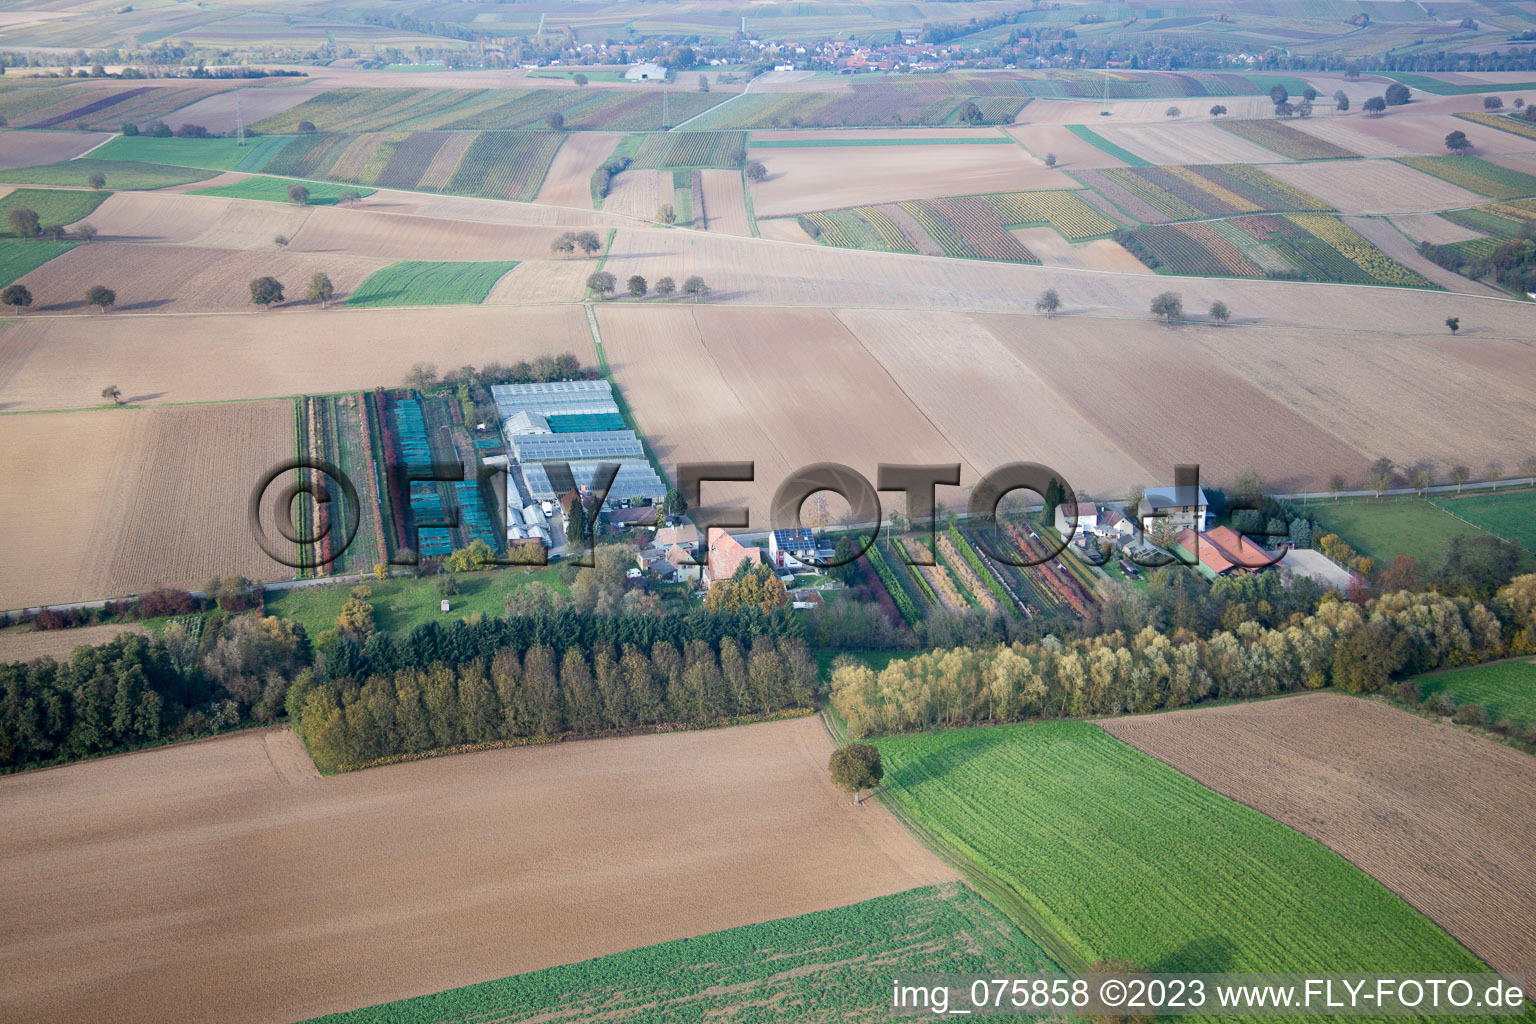 Aerial photograpy of Gardening in Vollmersweiler in the state Rhineland-Palatinate, Germany